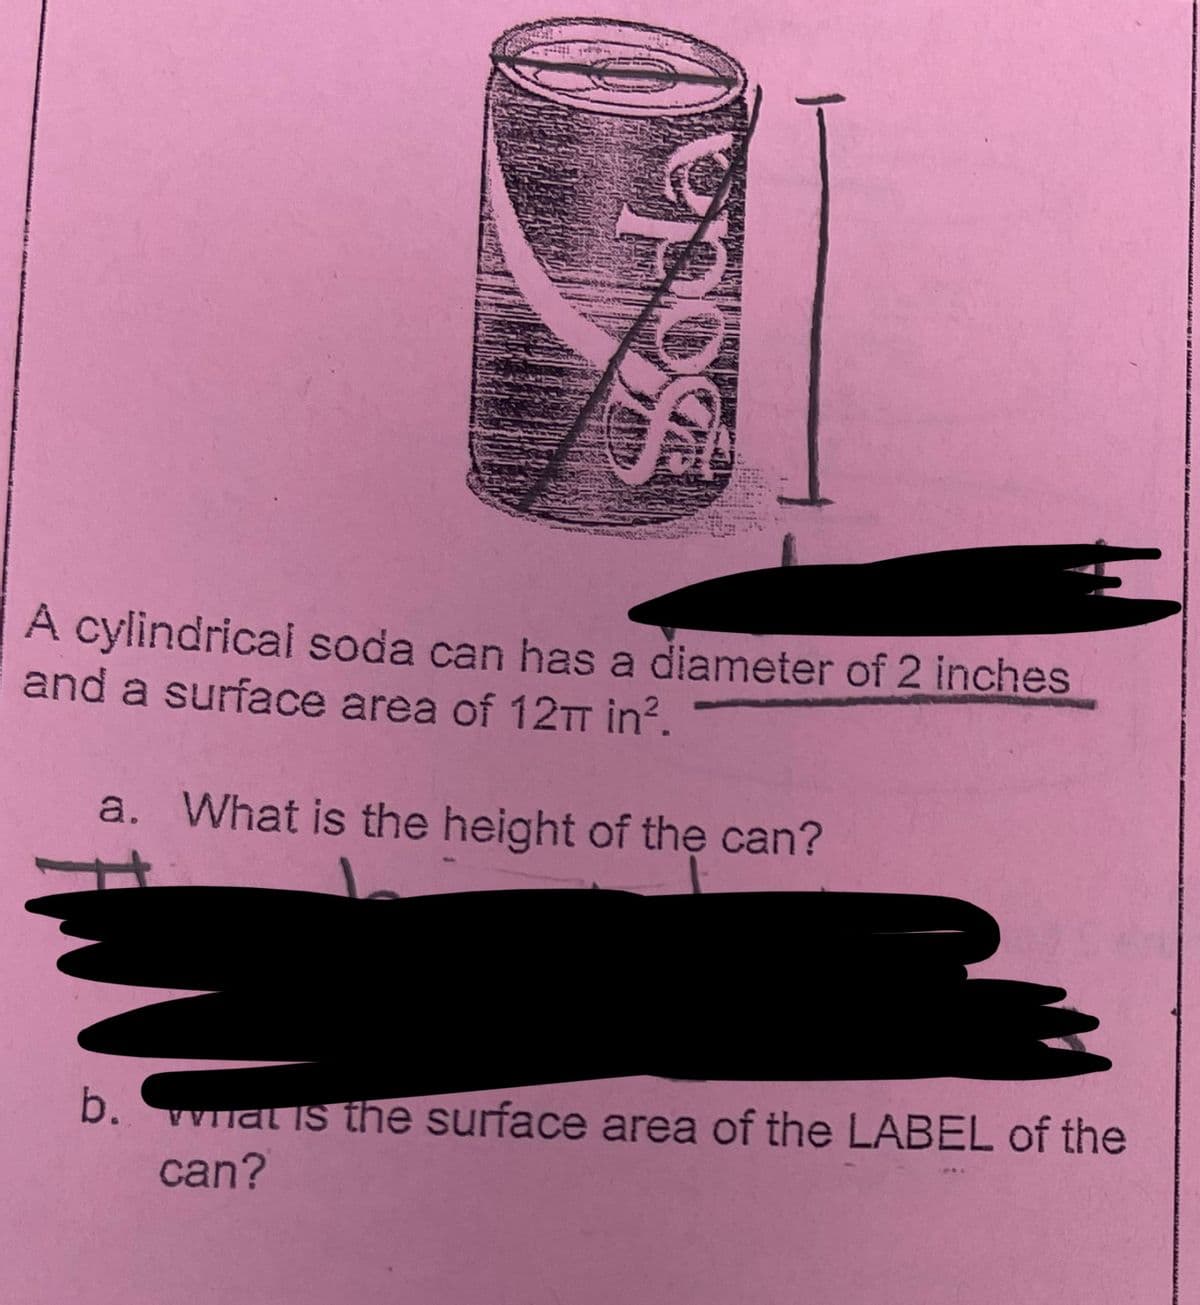 56
A cylindrical soda can has a diameter of 2 inches
and a surface area of 12π in².
a. What is the height of the can?
b. wat is the surface area of the LABEL of the
can?